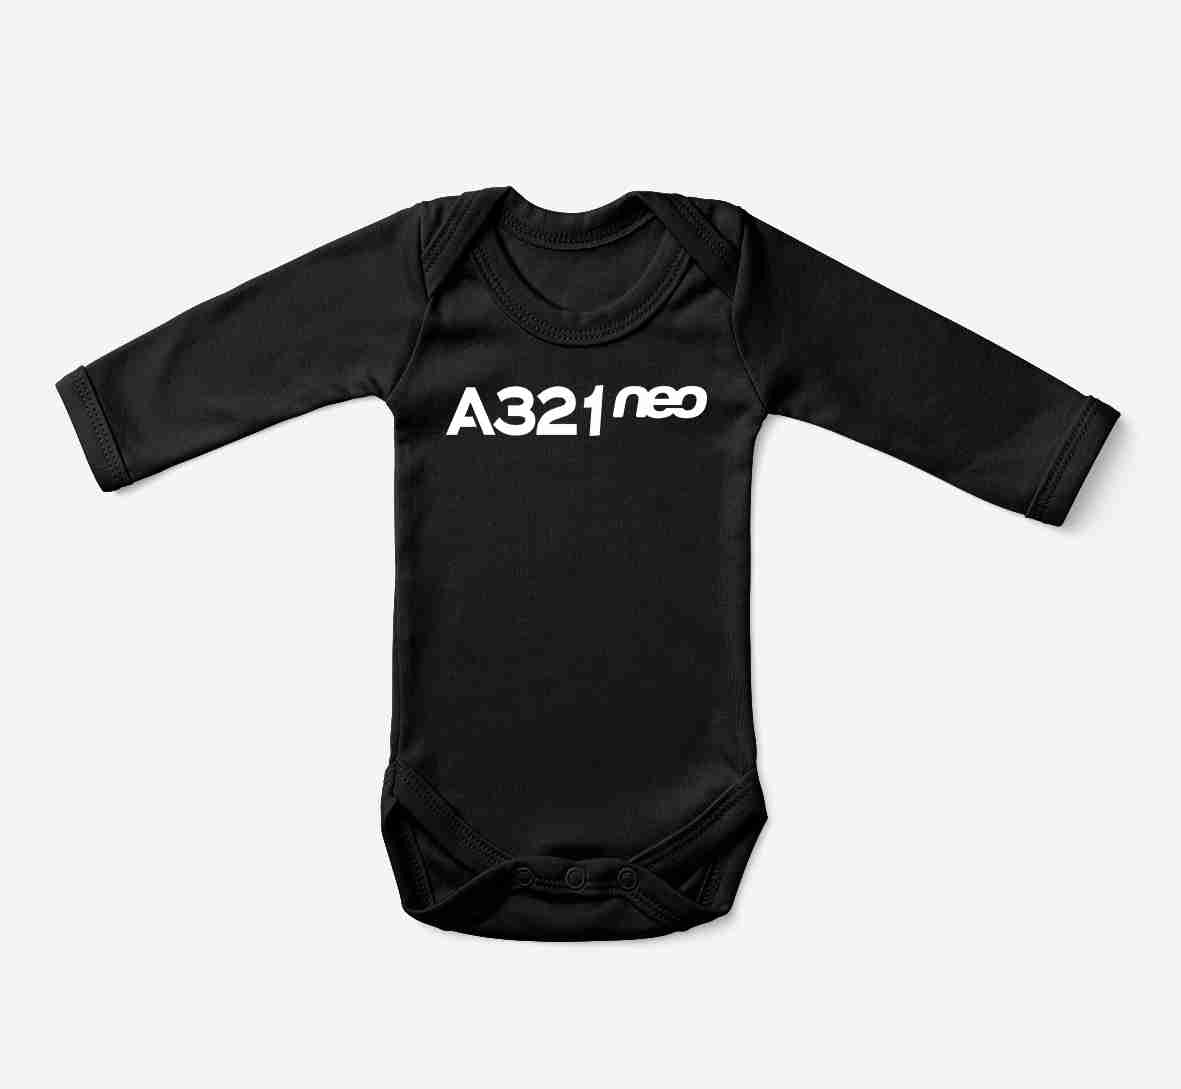 A321neo & Text Designed Baby Bodysuits